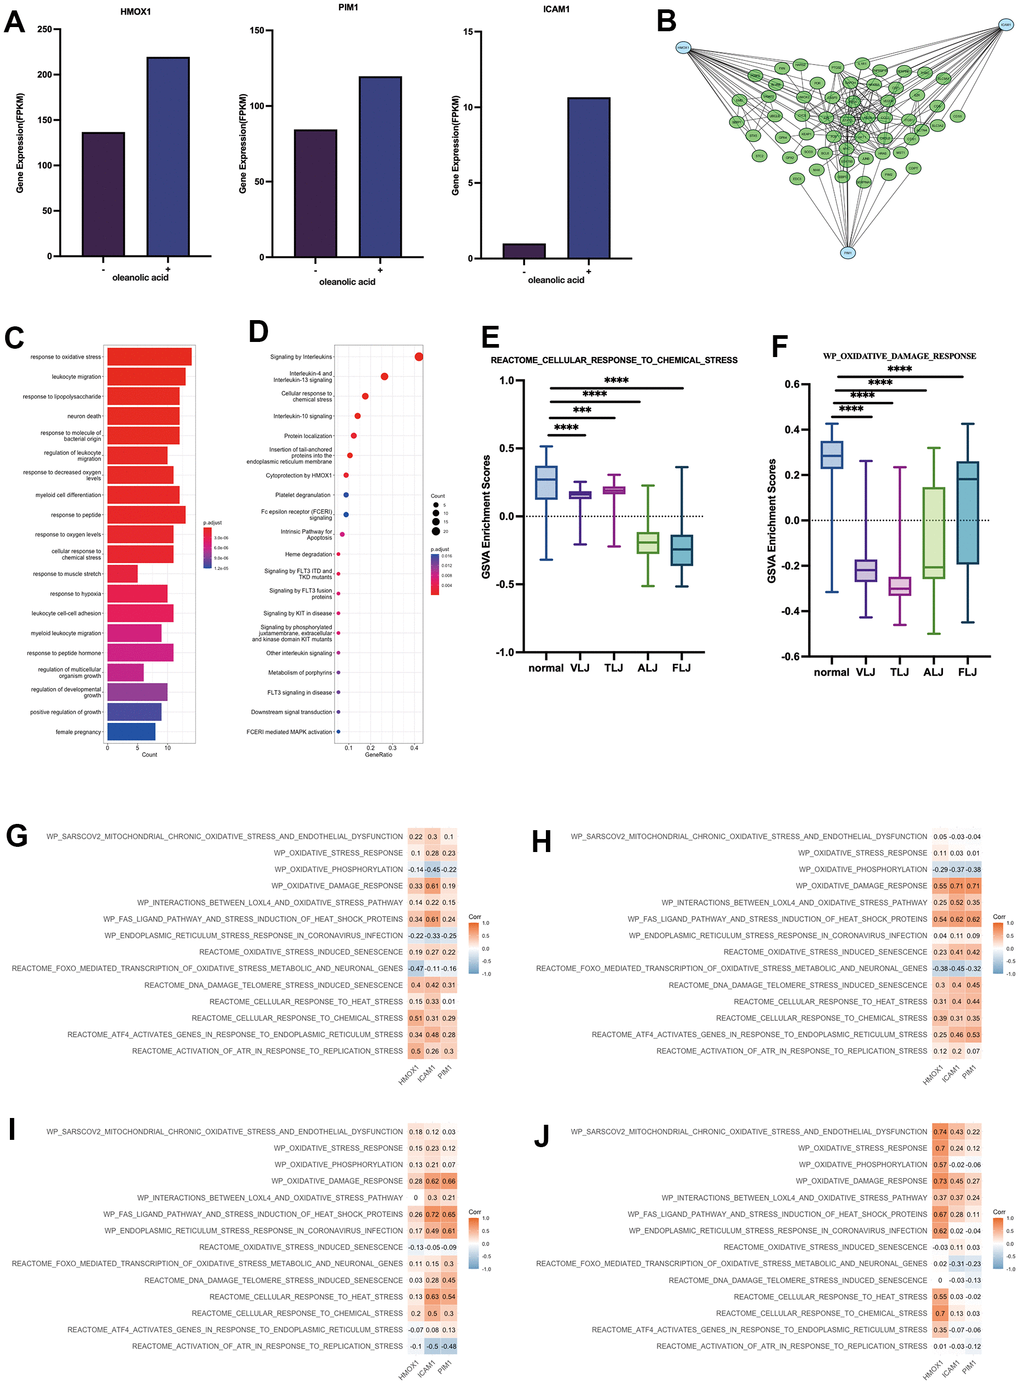 Key targets and protein networks of oleanolic acid (A) High expression of HMOX1, PIM1 and ICAM1 through oleanolic acid-related expression profiles. (B) PPI analysis of 3 key targets of oleanolic acid. (C) Gene function of genes in PPI analysis. (D) Cellular pathways of genes in PPI analysis. (E) GSVA analysis of response to chemical stress in liver injury. (F) GSVA analysis of response to oxidative damage in liver injury. (G) Relationship between key targets of oleanolic acid and 14 oxidative stress pathways in VLJ. (H) Relationship between key targets of oleanolic acid and 14 oxidative stress pathways in TLJ. (I) Relationship between key targets of oleanolic acid and 14 oxidative stress pathways in ALJ. (J) Relationship between key targets of oleanolic acid and 14 oxidative stress pathways in FLJ.